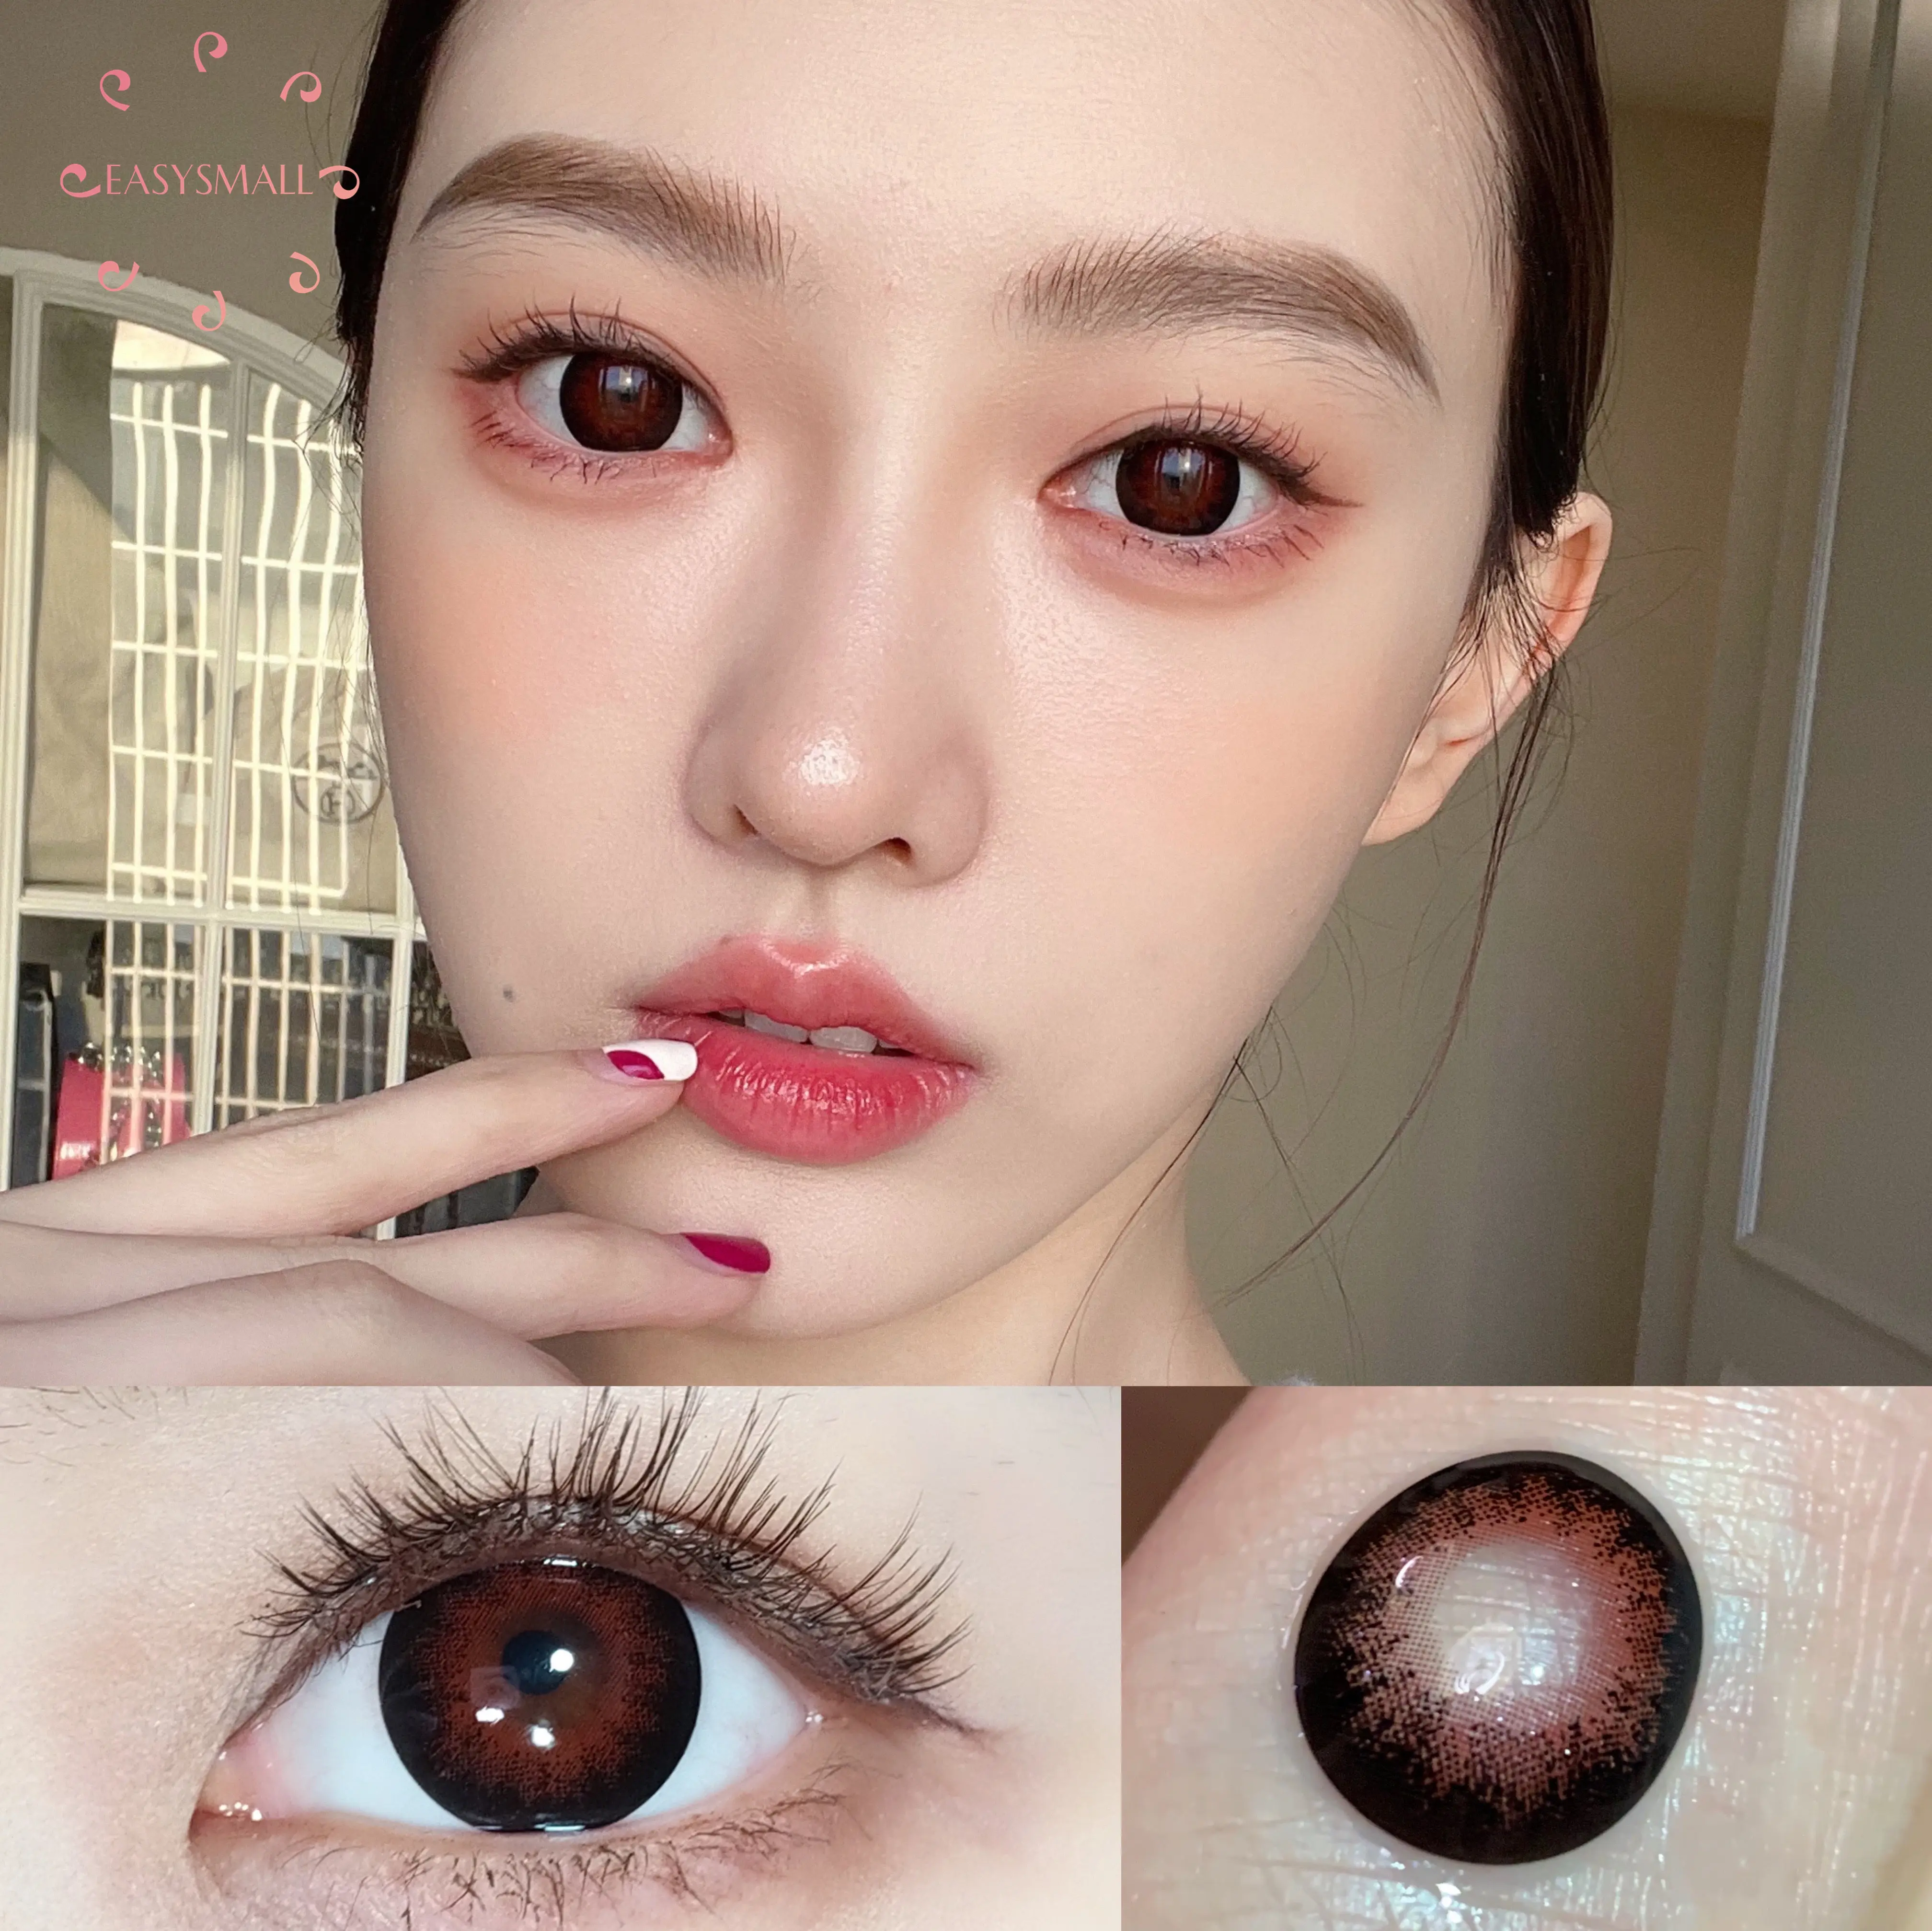 easysmall loli red brown contact lenses for eyes high quality natural colored big beauty pupil degree myopia prescription free global shipping